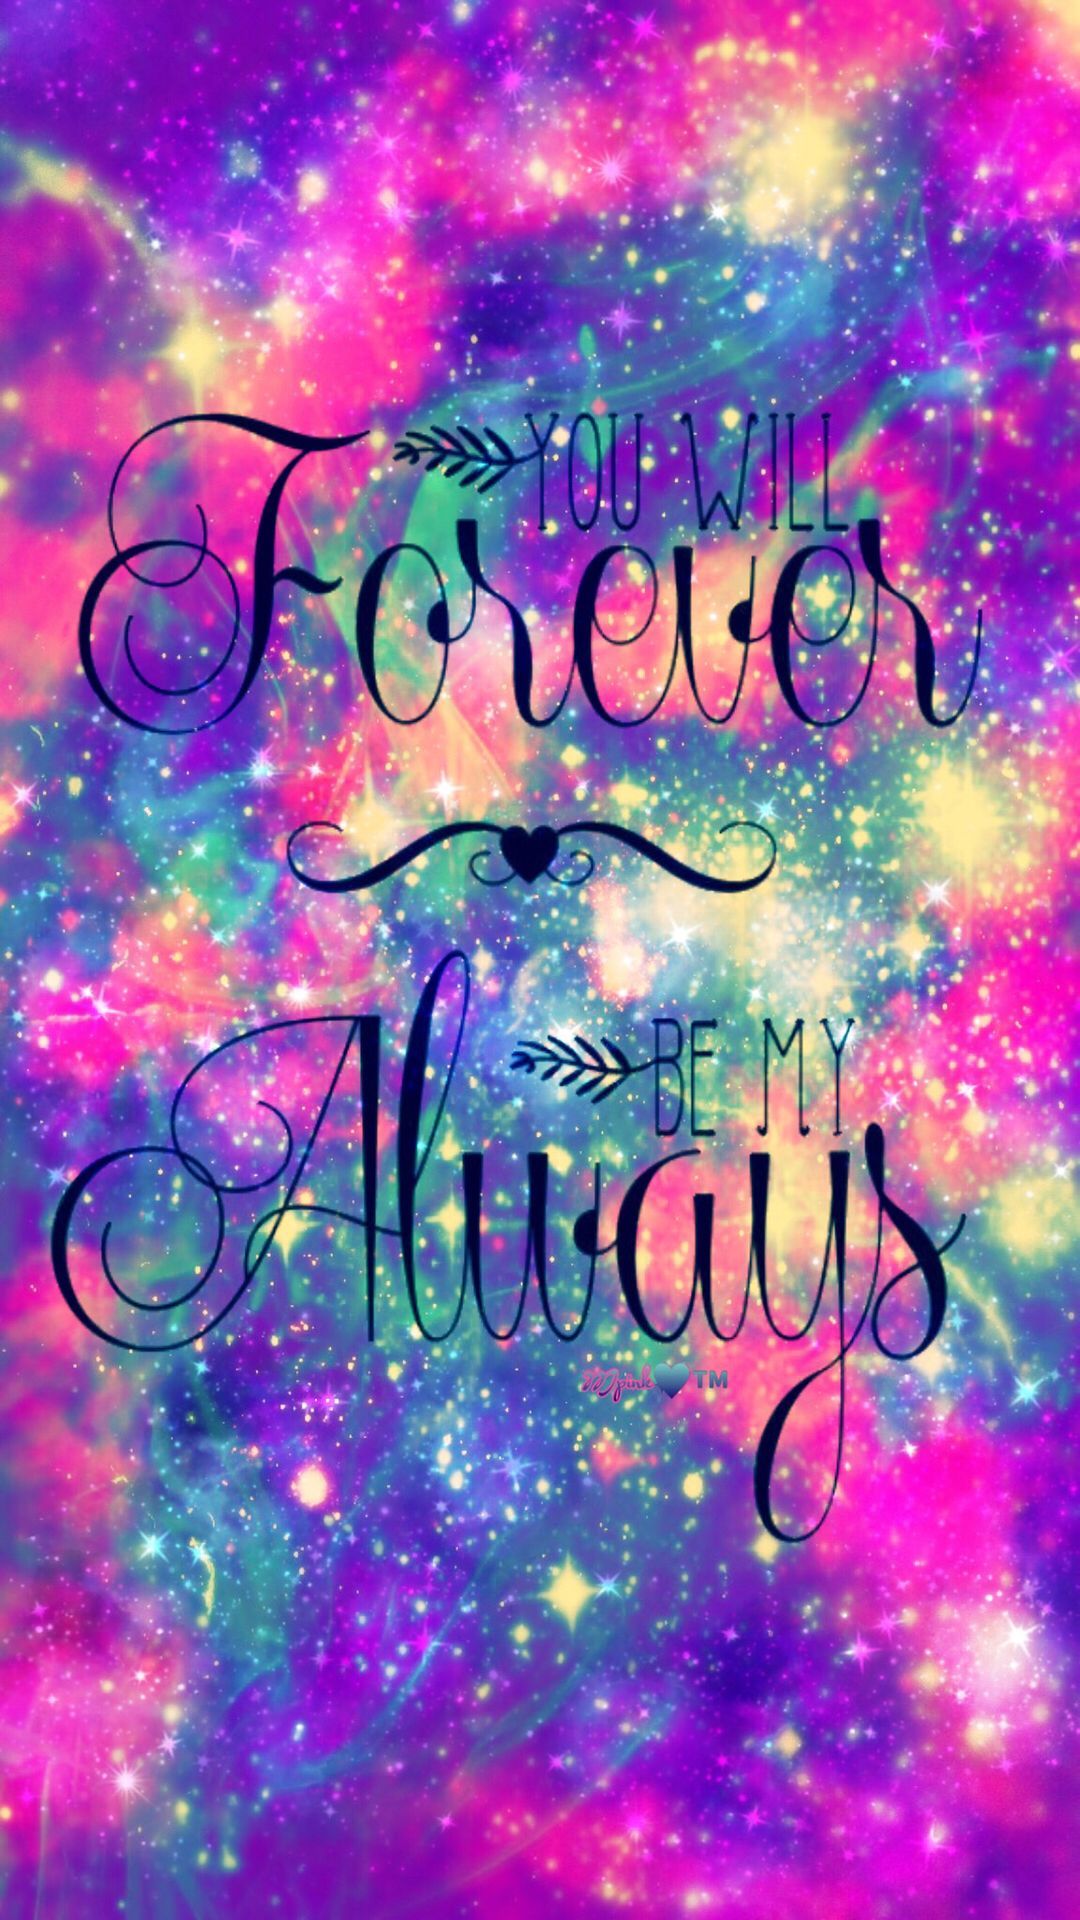 Forever & Always Galaxy Wallpaper #androidwallpaper #iphonewallpaper # wallpaper #galaxy #sparkle #glitte. Galaxy wallpaper, Pretty wallpaper, Cellphone wallpaper